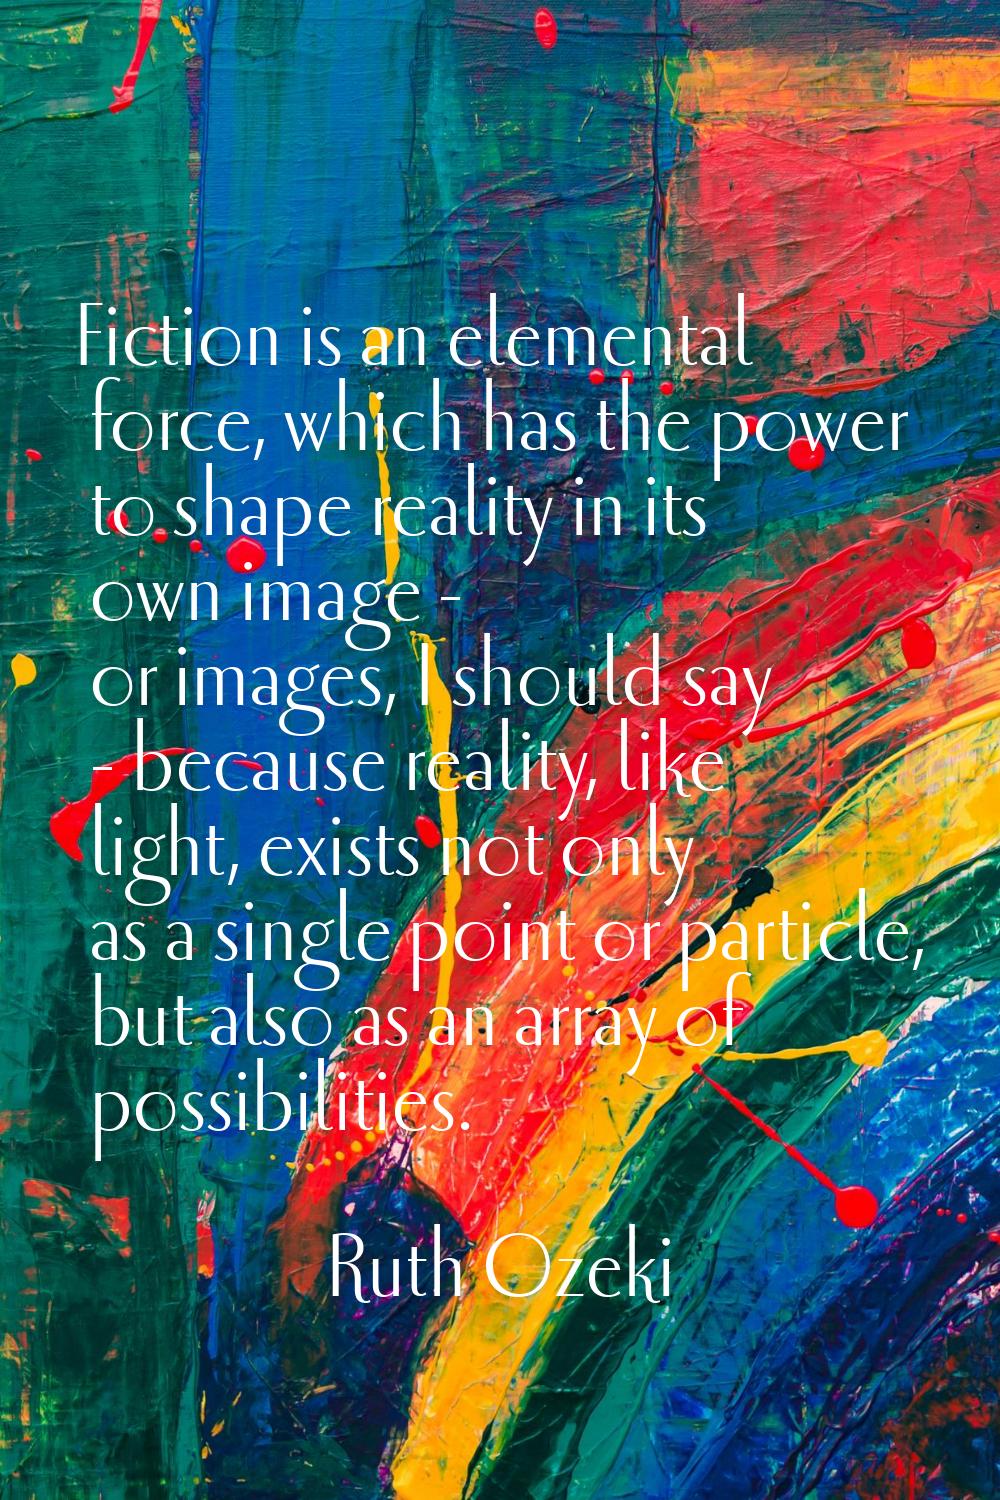 Fiction is an elemental force, which has the power to shape reality in its own image - or images, I